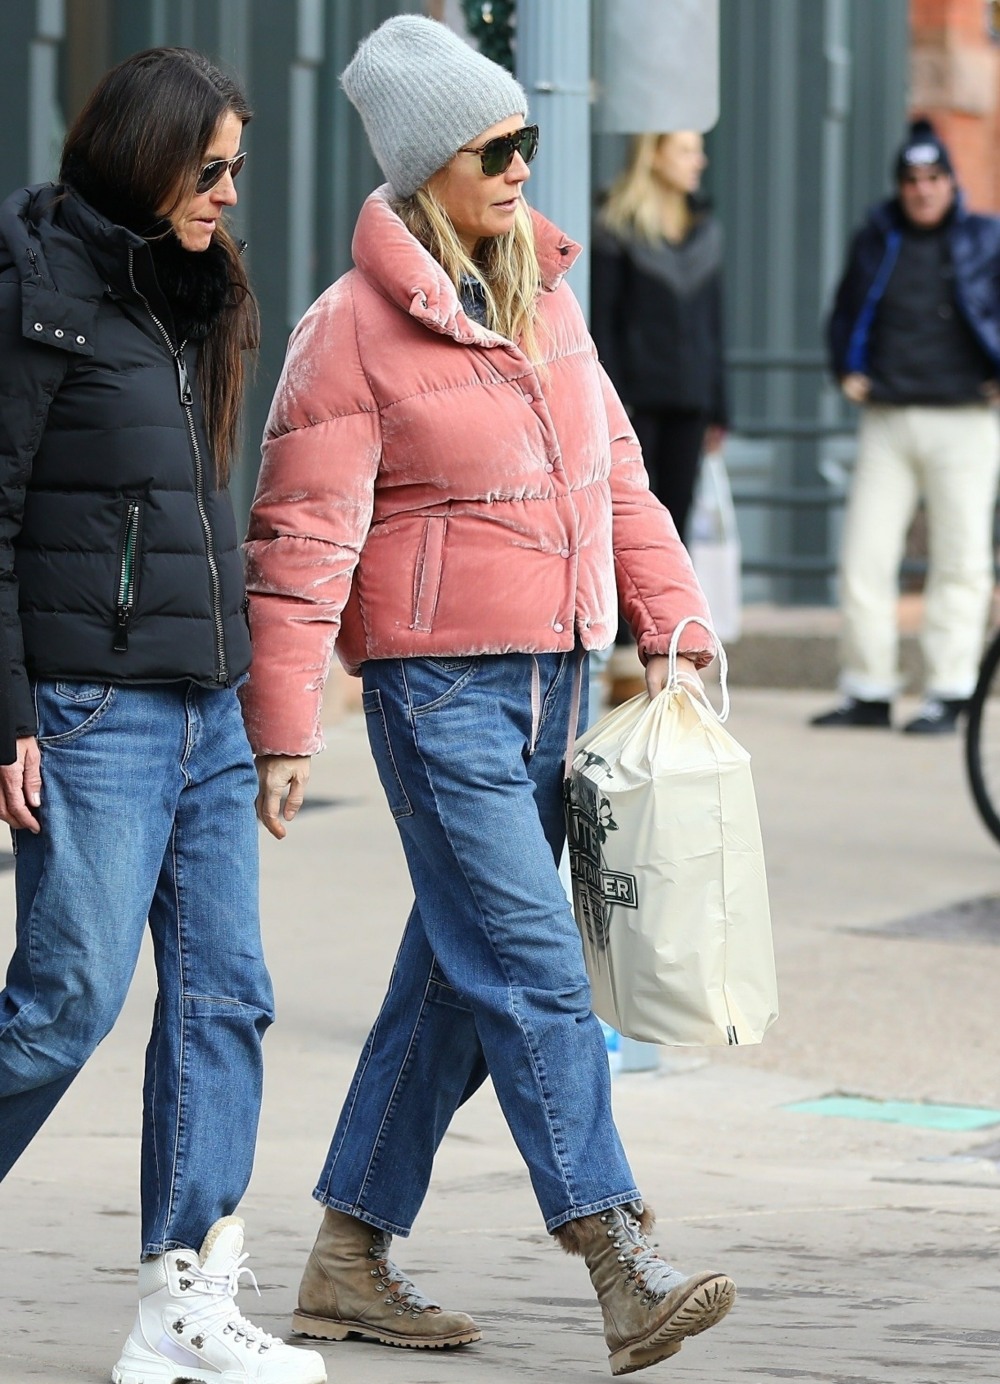 Gwyneth Paltrow goes Christmas shopping with a group of friends in Aspen